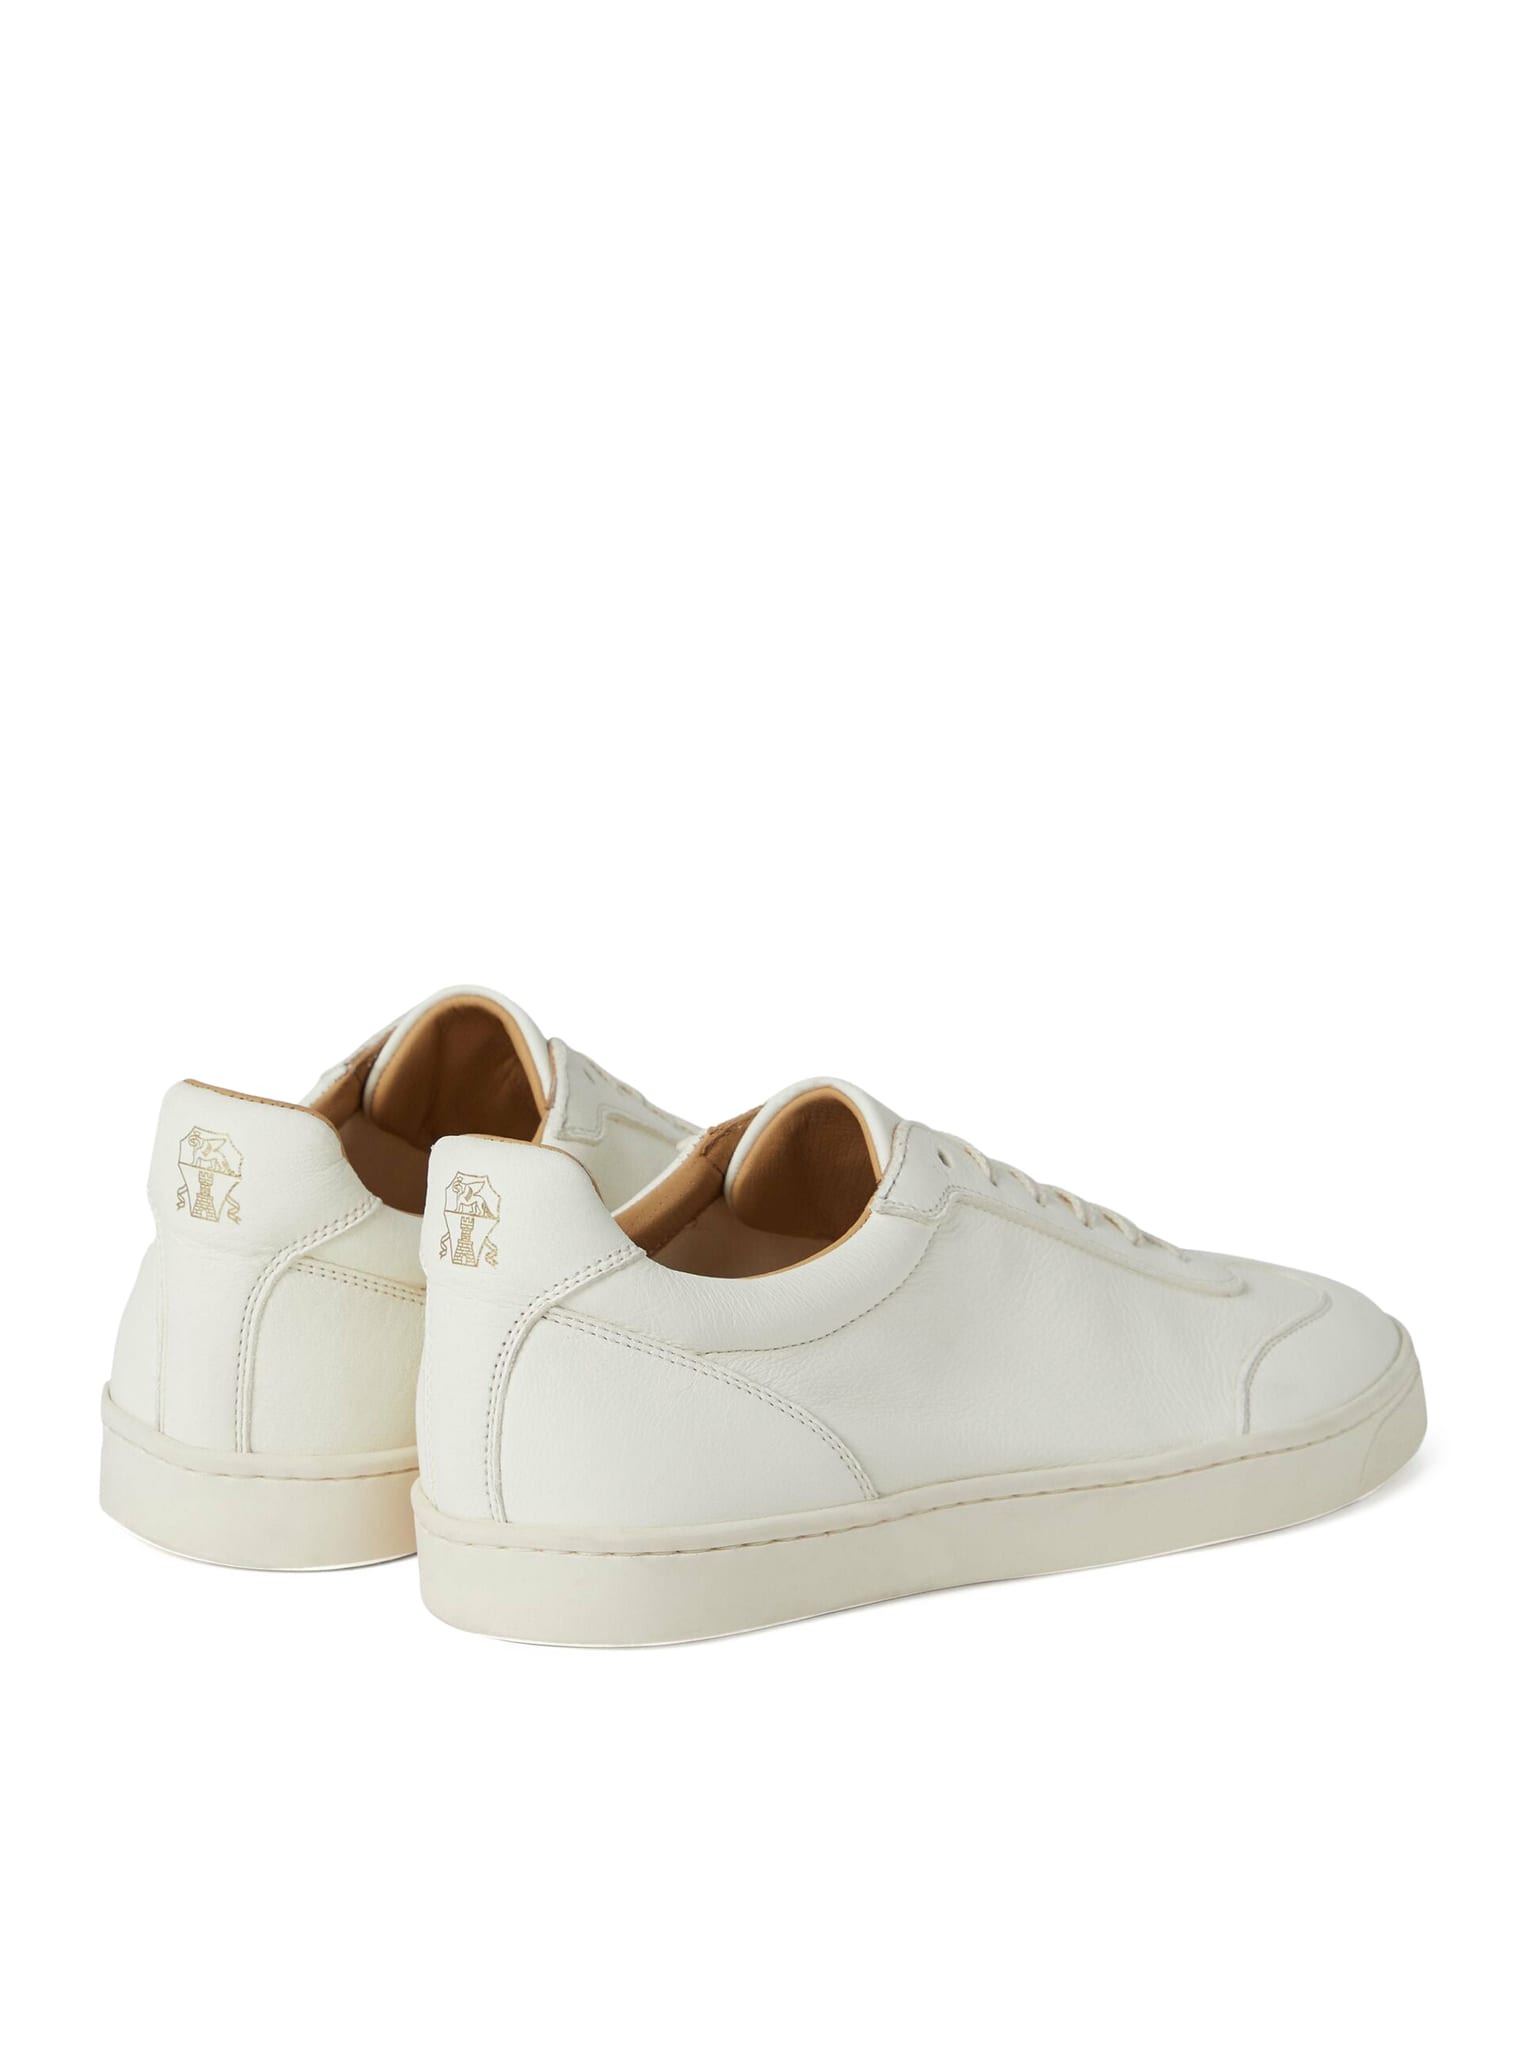 Shop Brunello Cucinelli Pair Of Sneakers In Panama